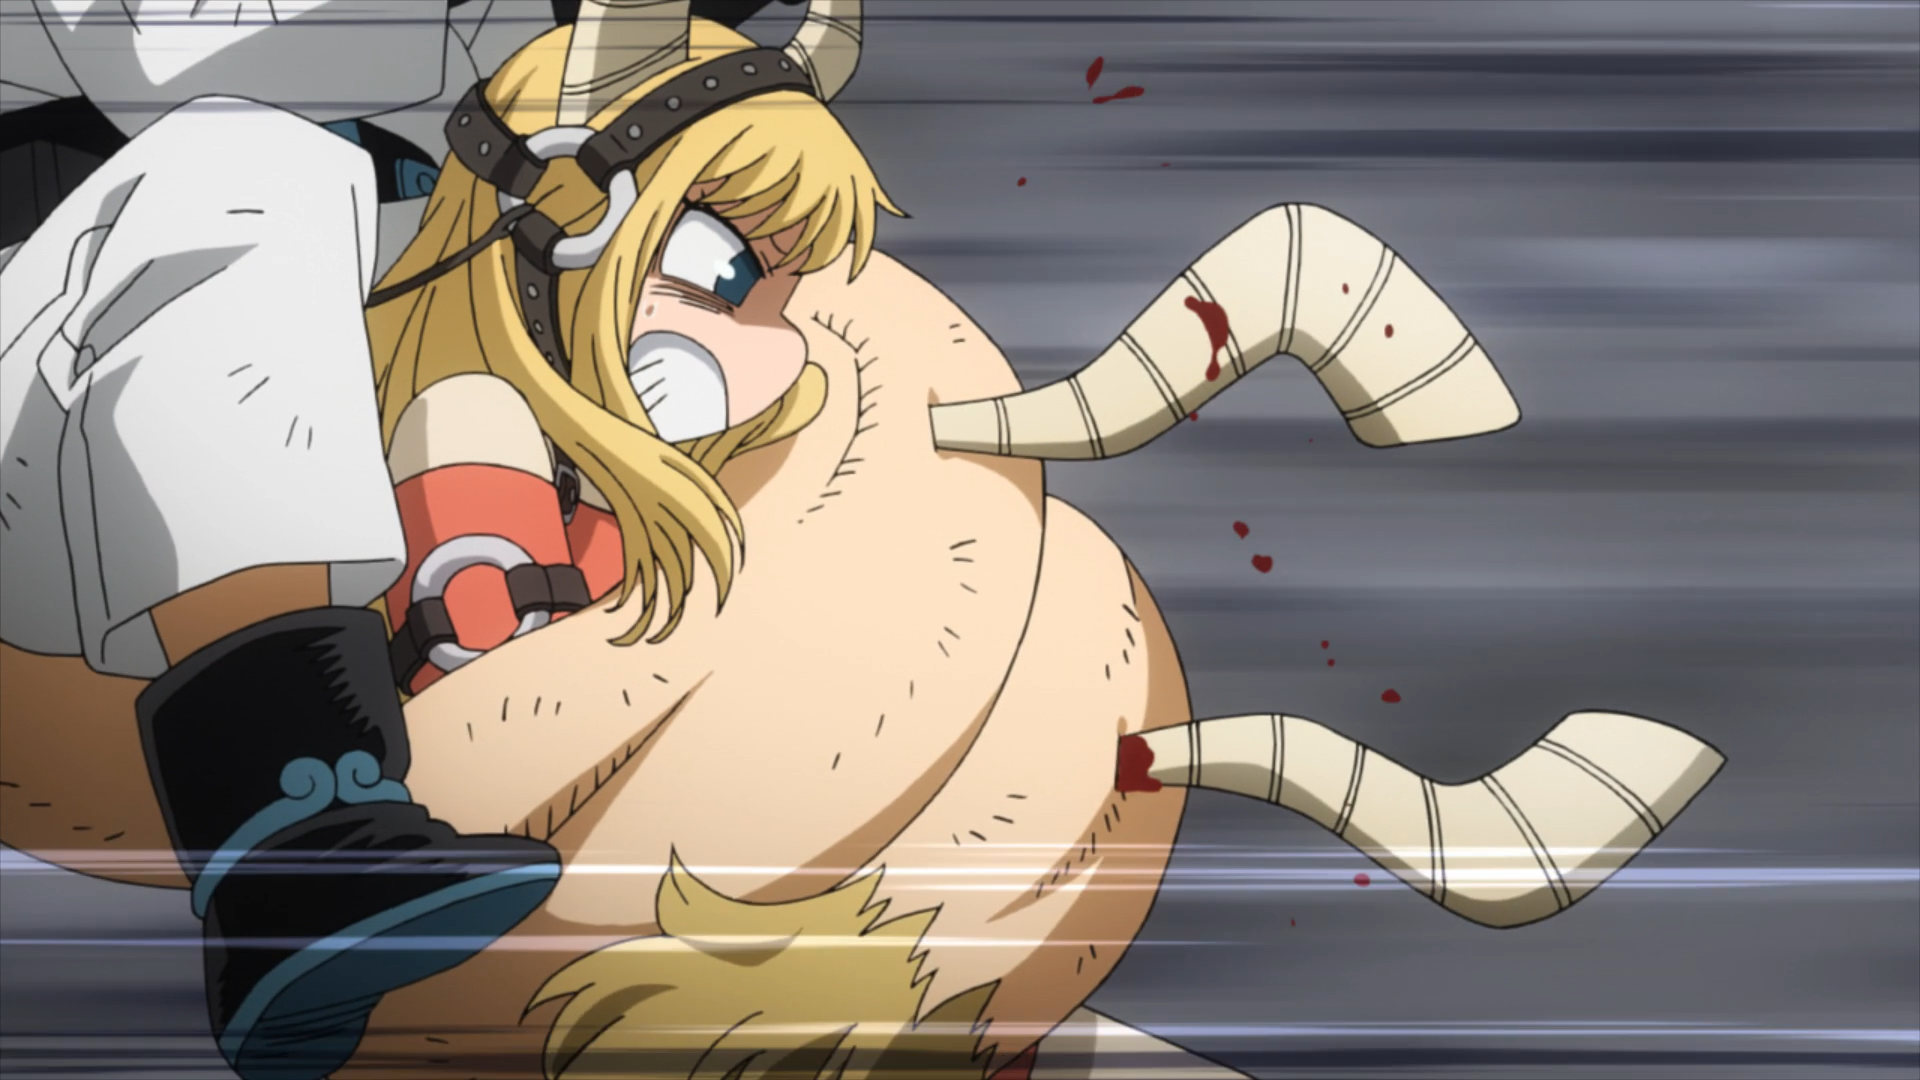 Pony manages to save herself while throwing Ojiro into a jail cell at the same time!